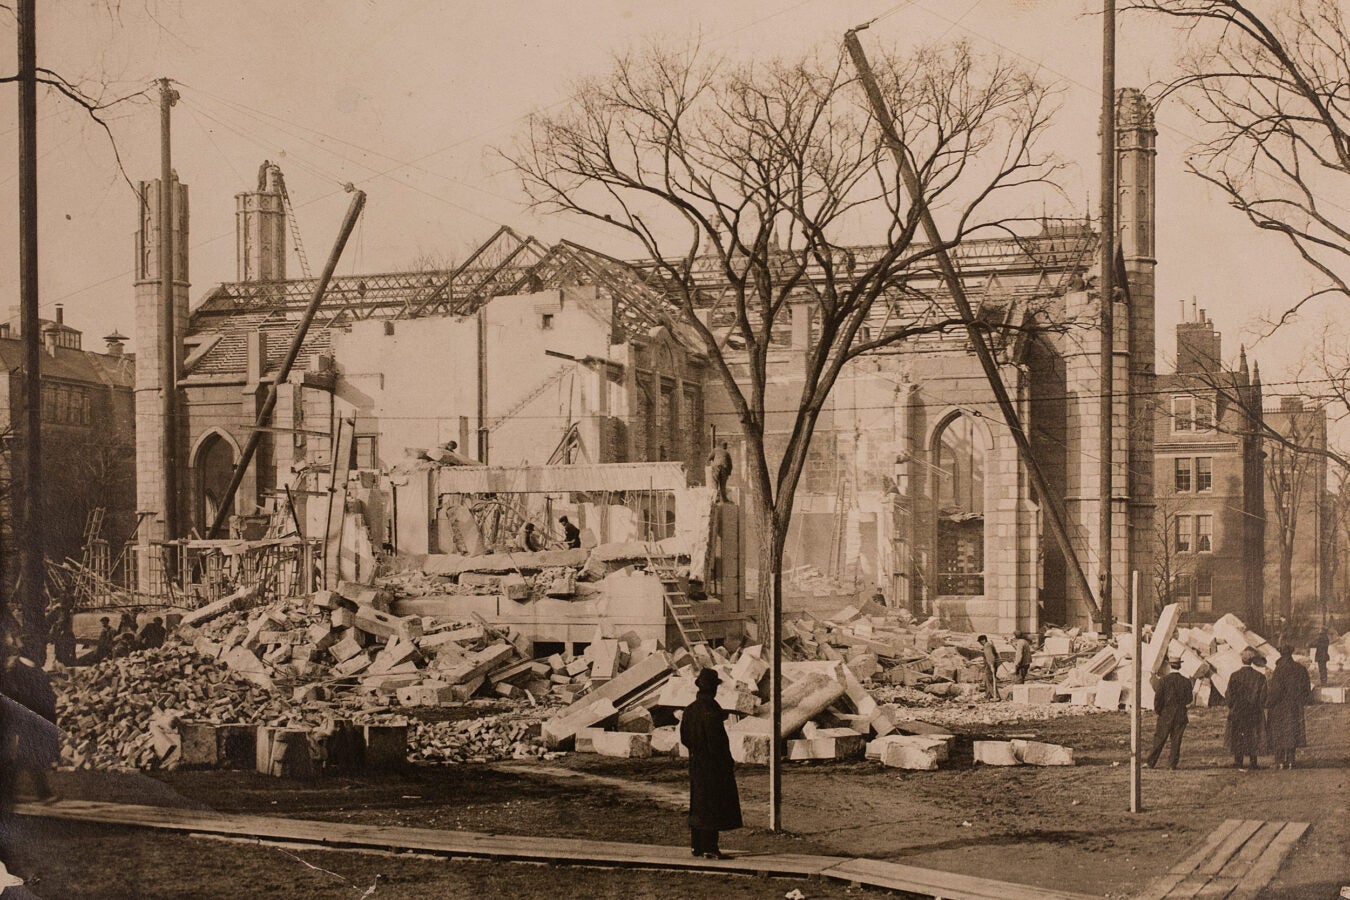 Passers-by watch razing of Gore Hall in 1913.